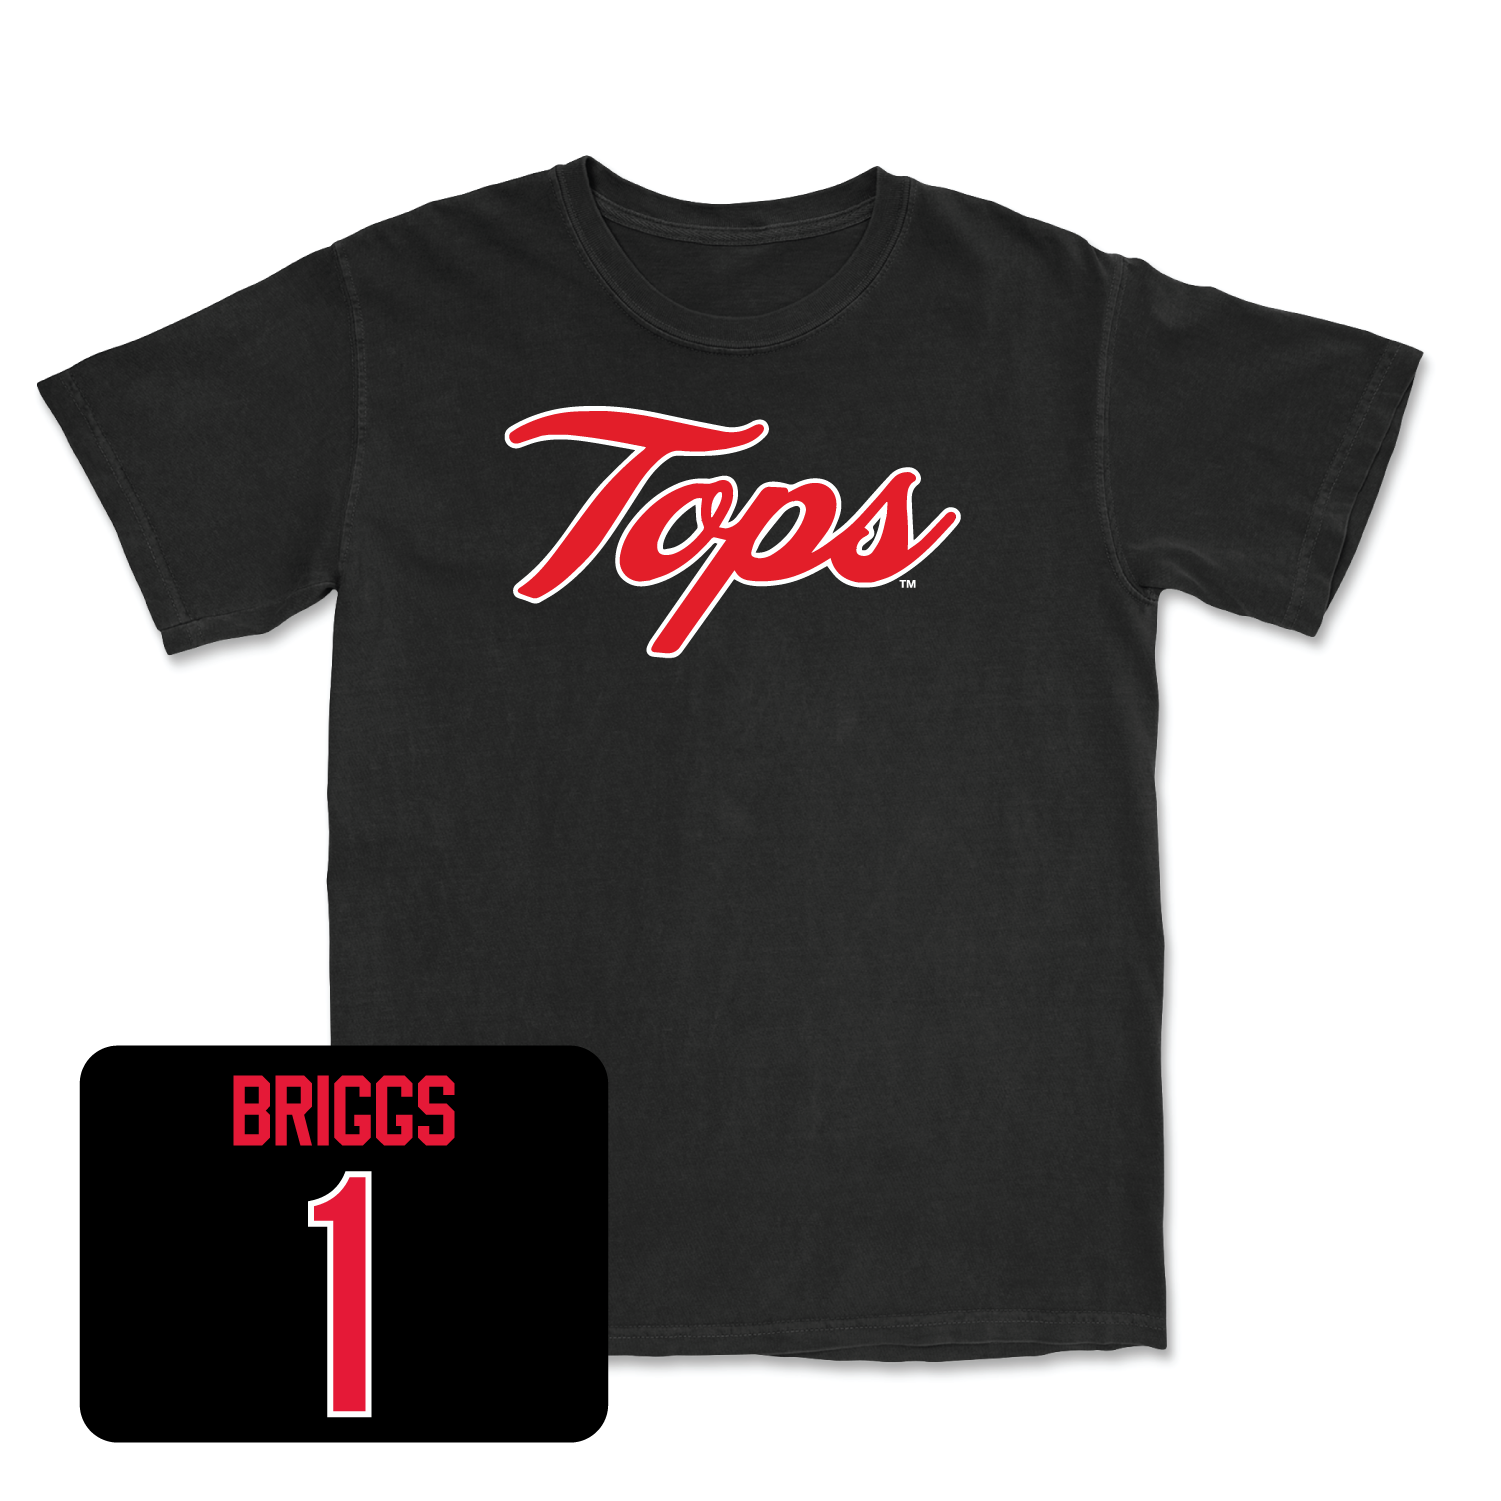 Black Women's Volleyball Tops Tee Large / Paige Briggs | #1